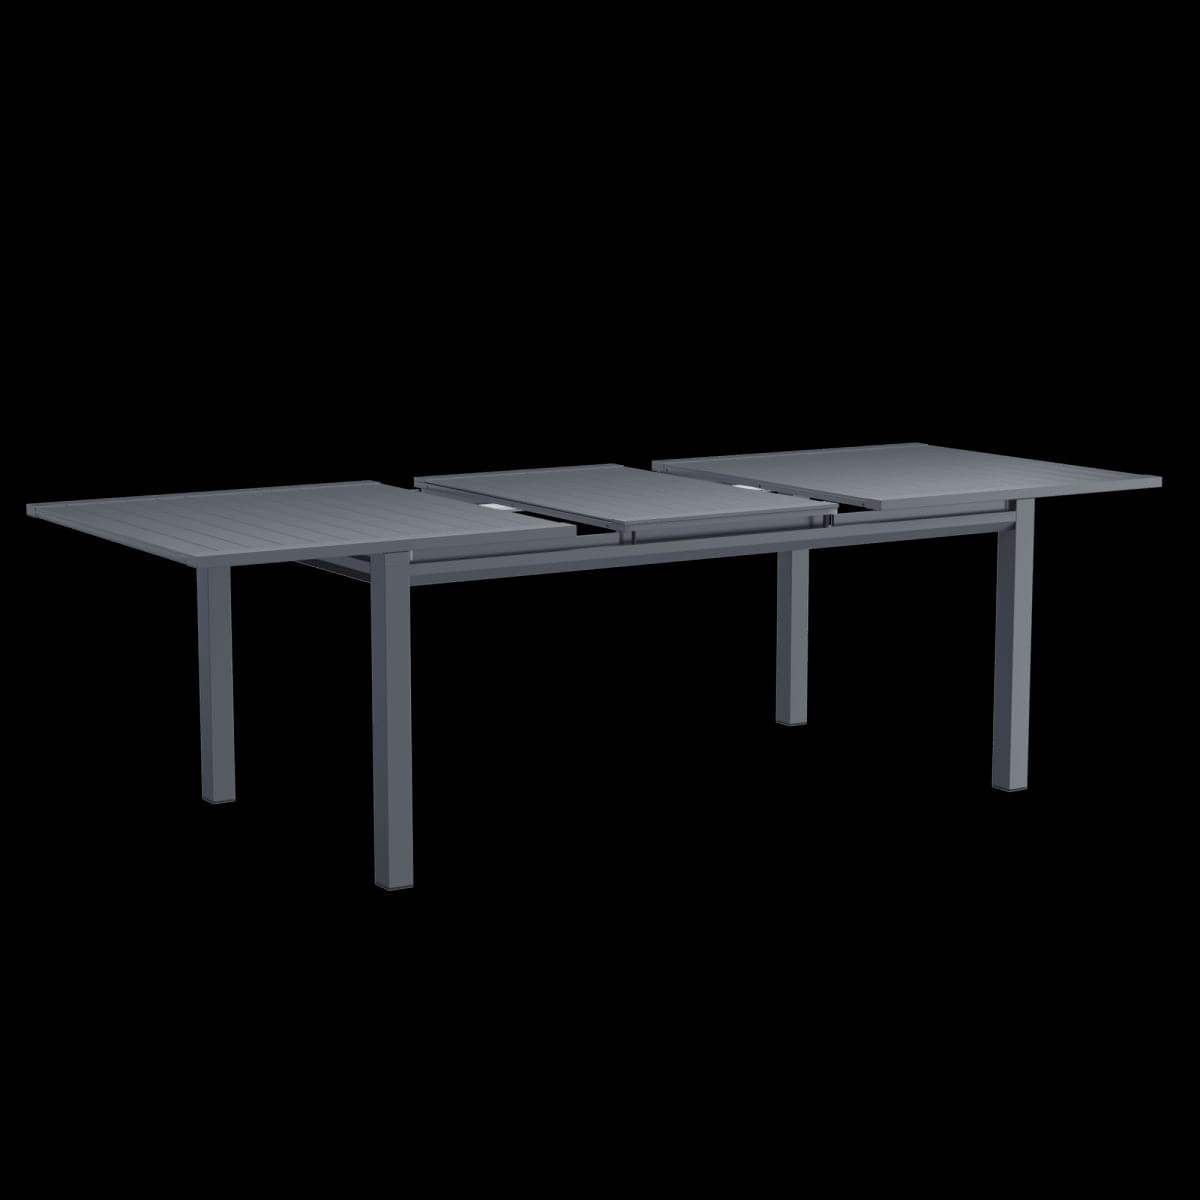 ODYSSEA II NATERIAL 180/240X100 ANTHRACITE EXTENDING TABLE - best price from Maltashopper.com BR500013641